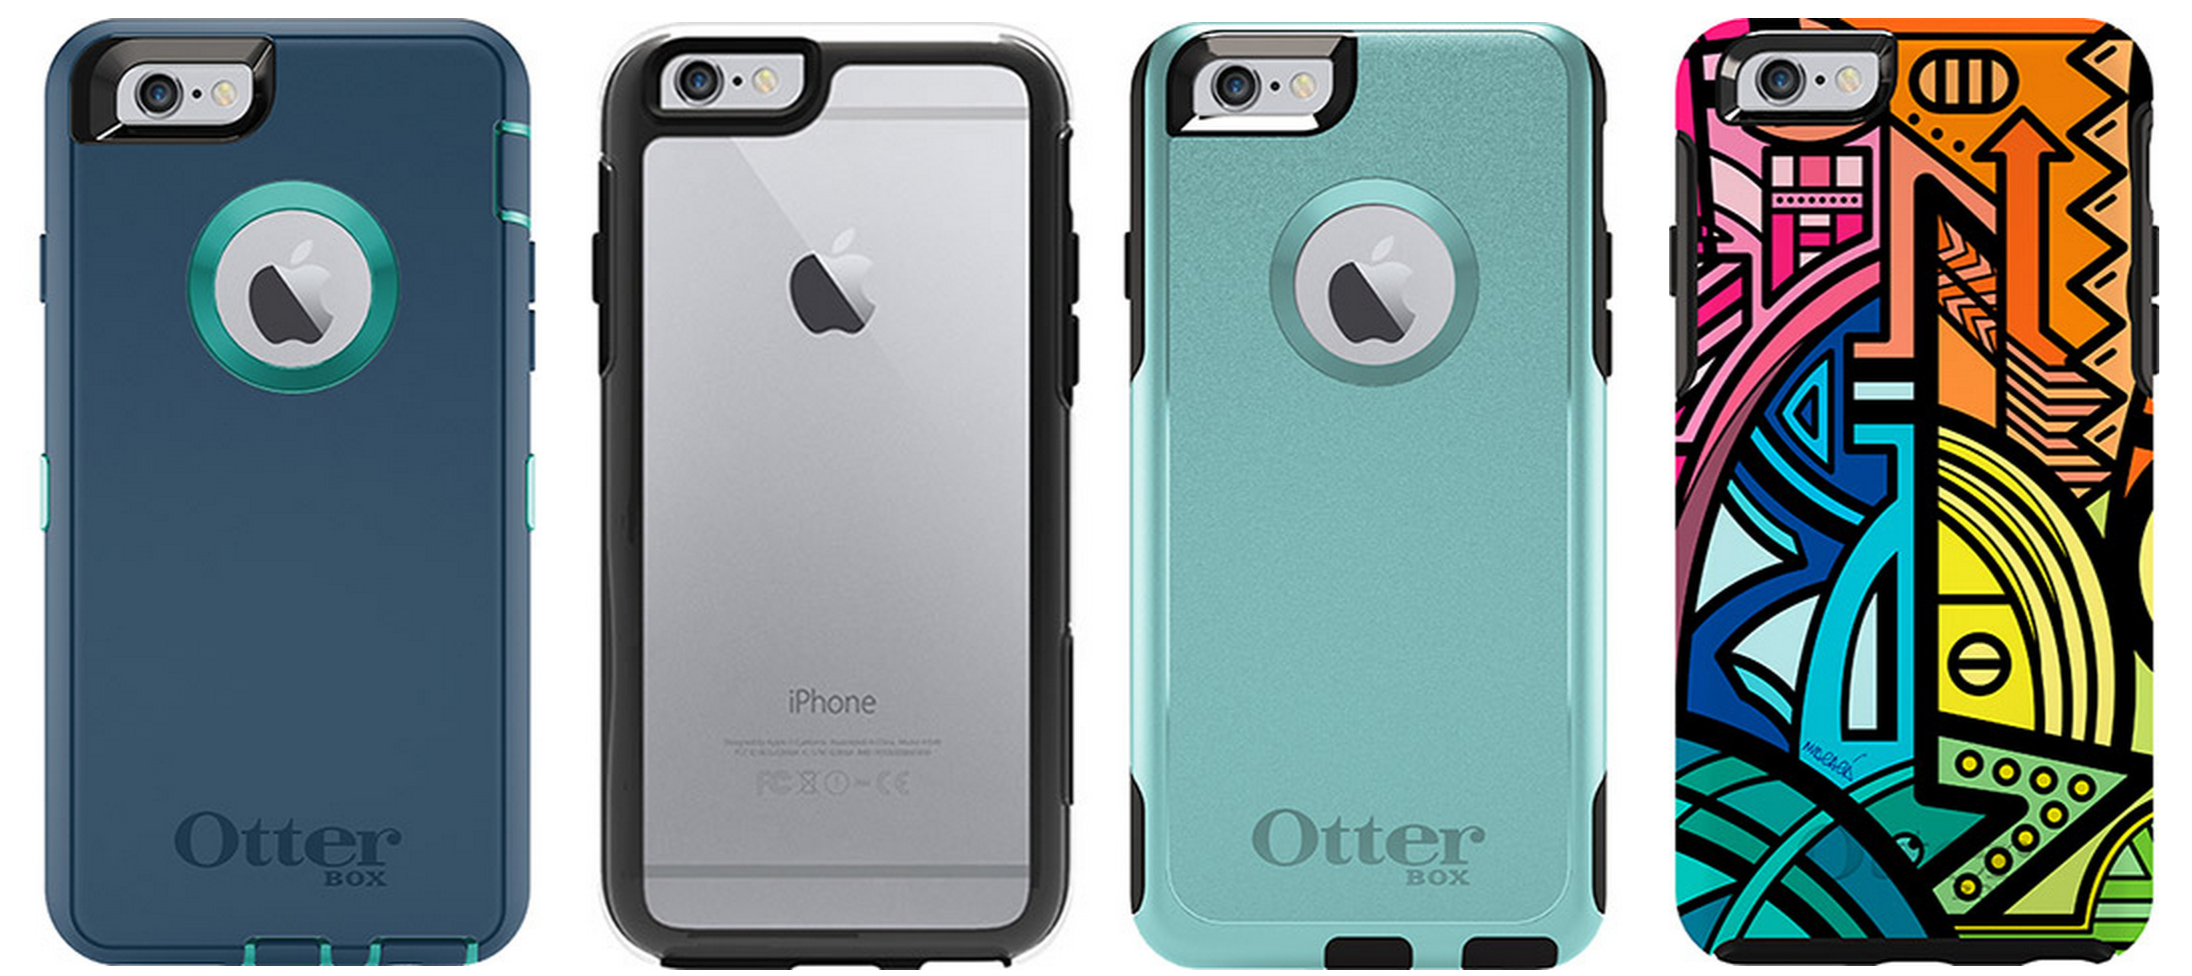 Otterbox-iPhone-6s-cases